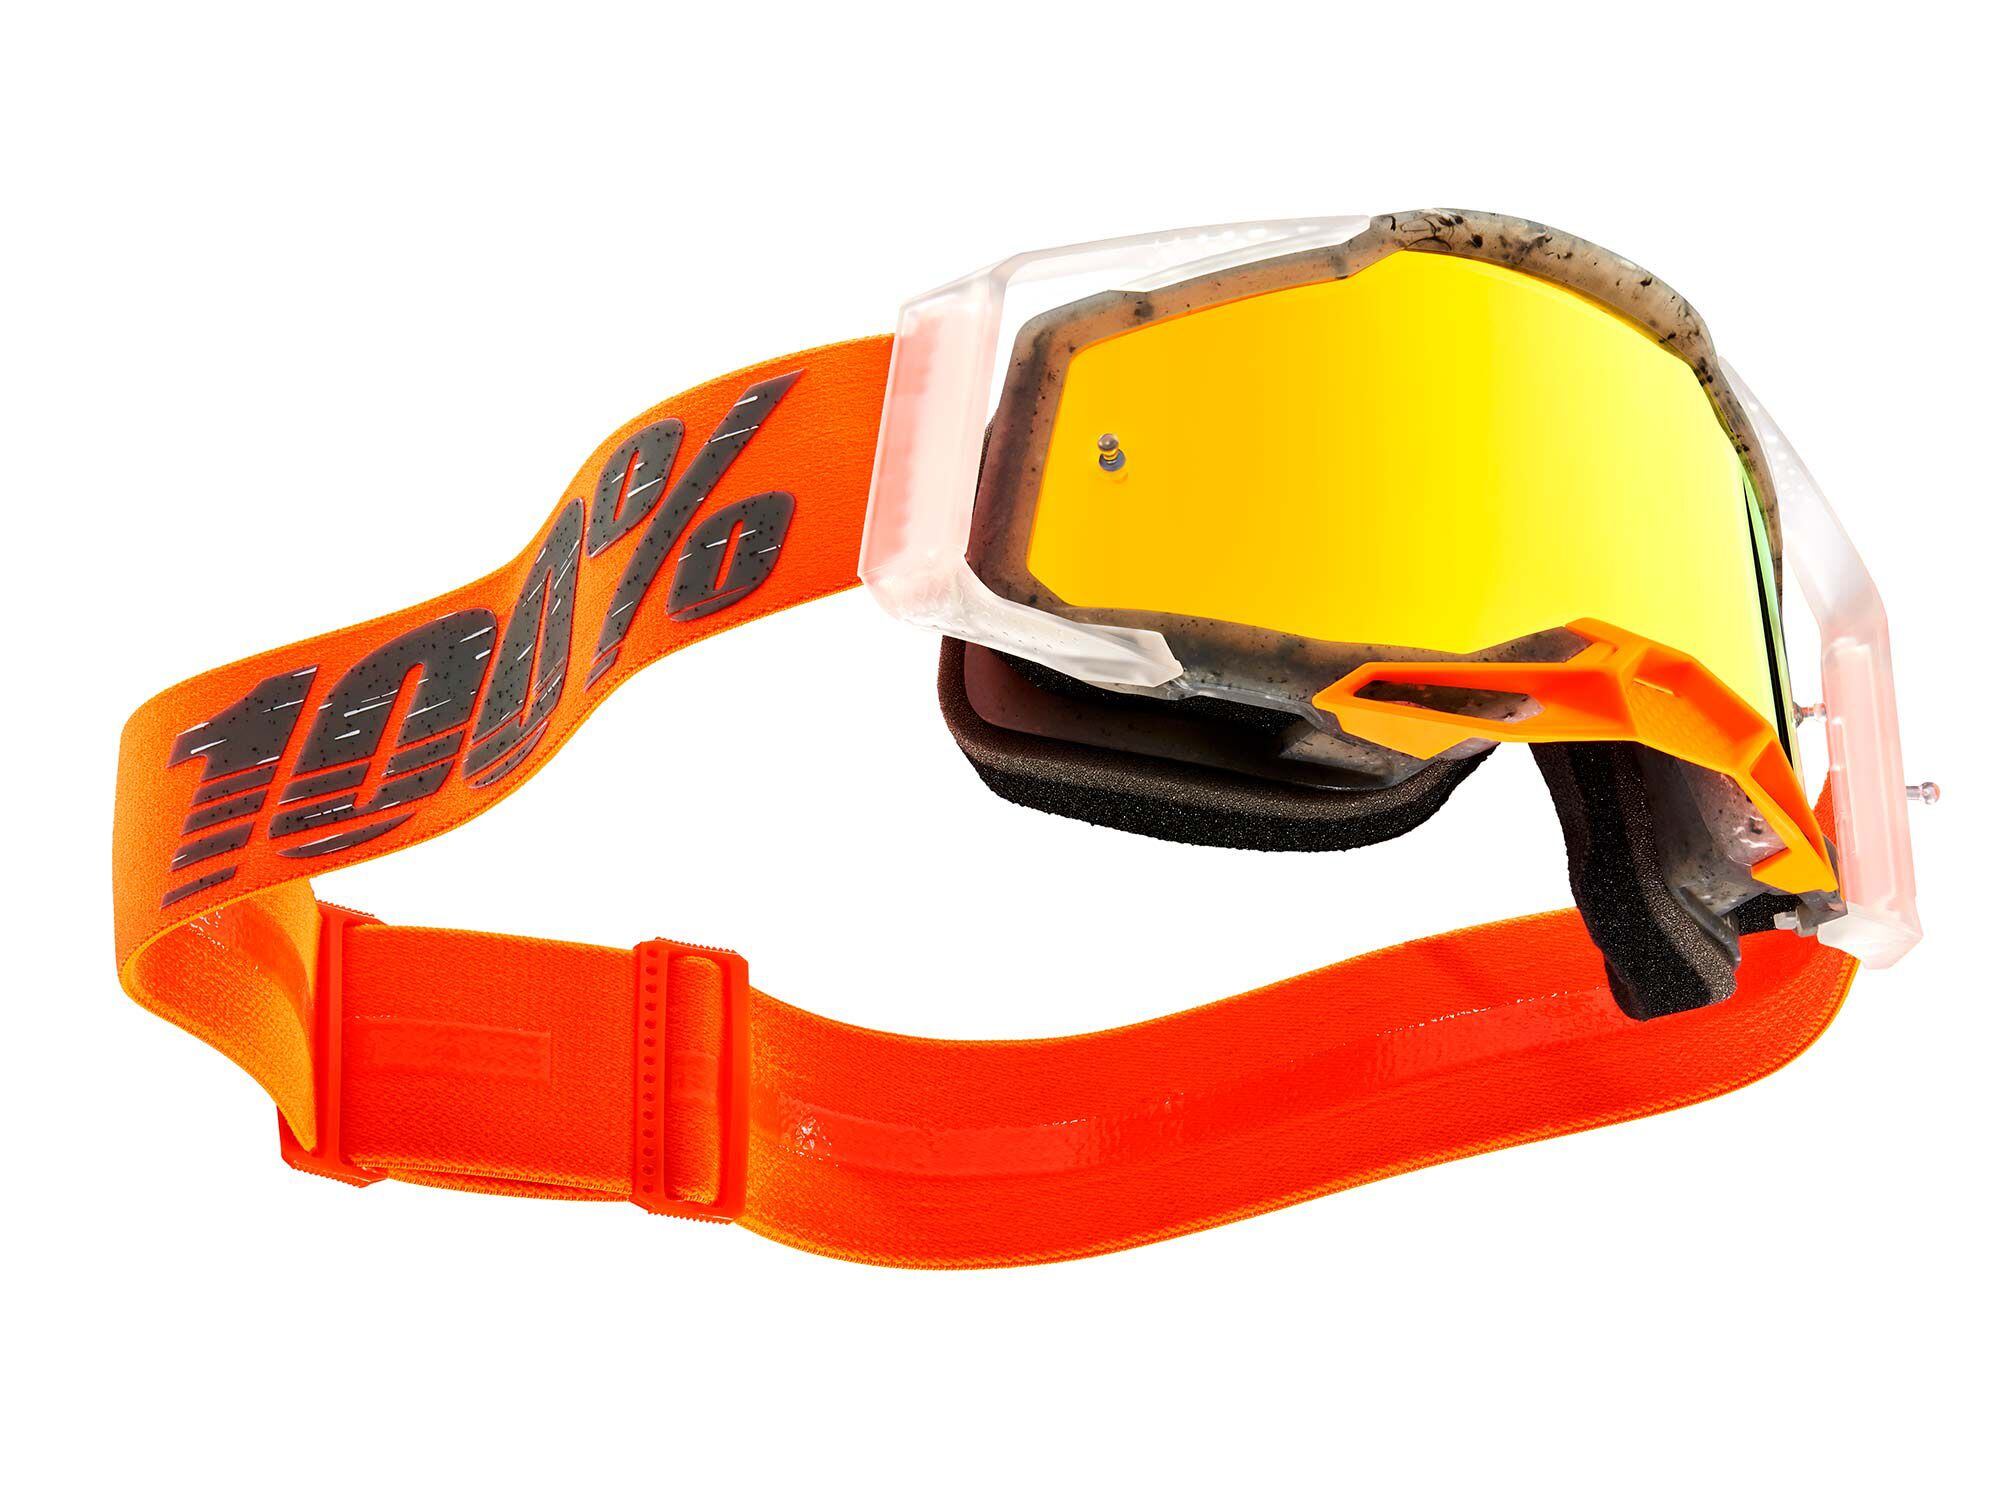 The Racecraft 2, a high-quality goggle at an affordable price.